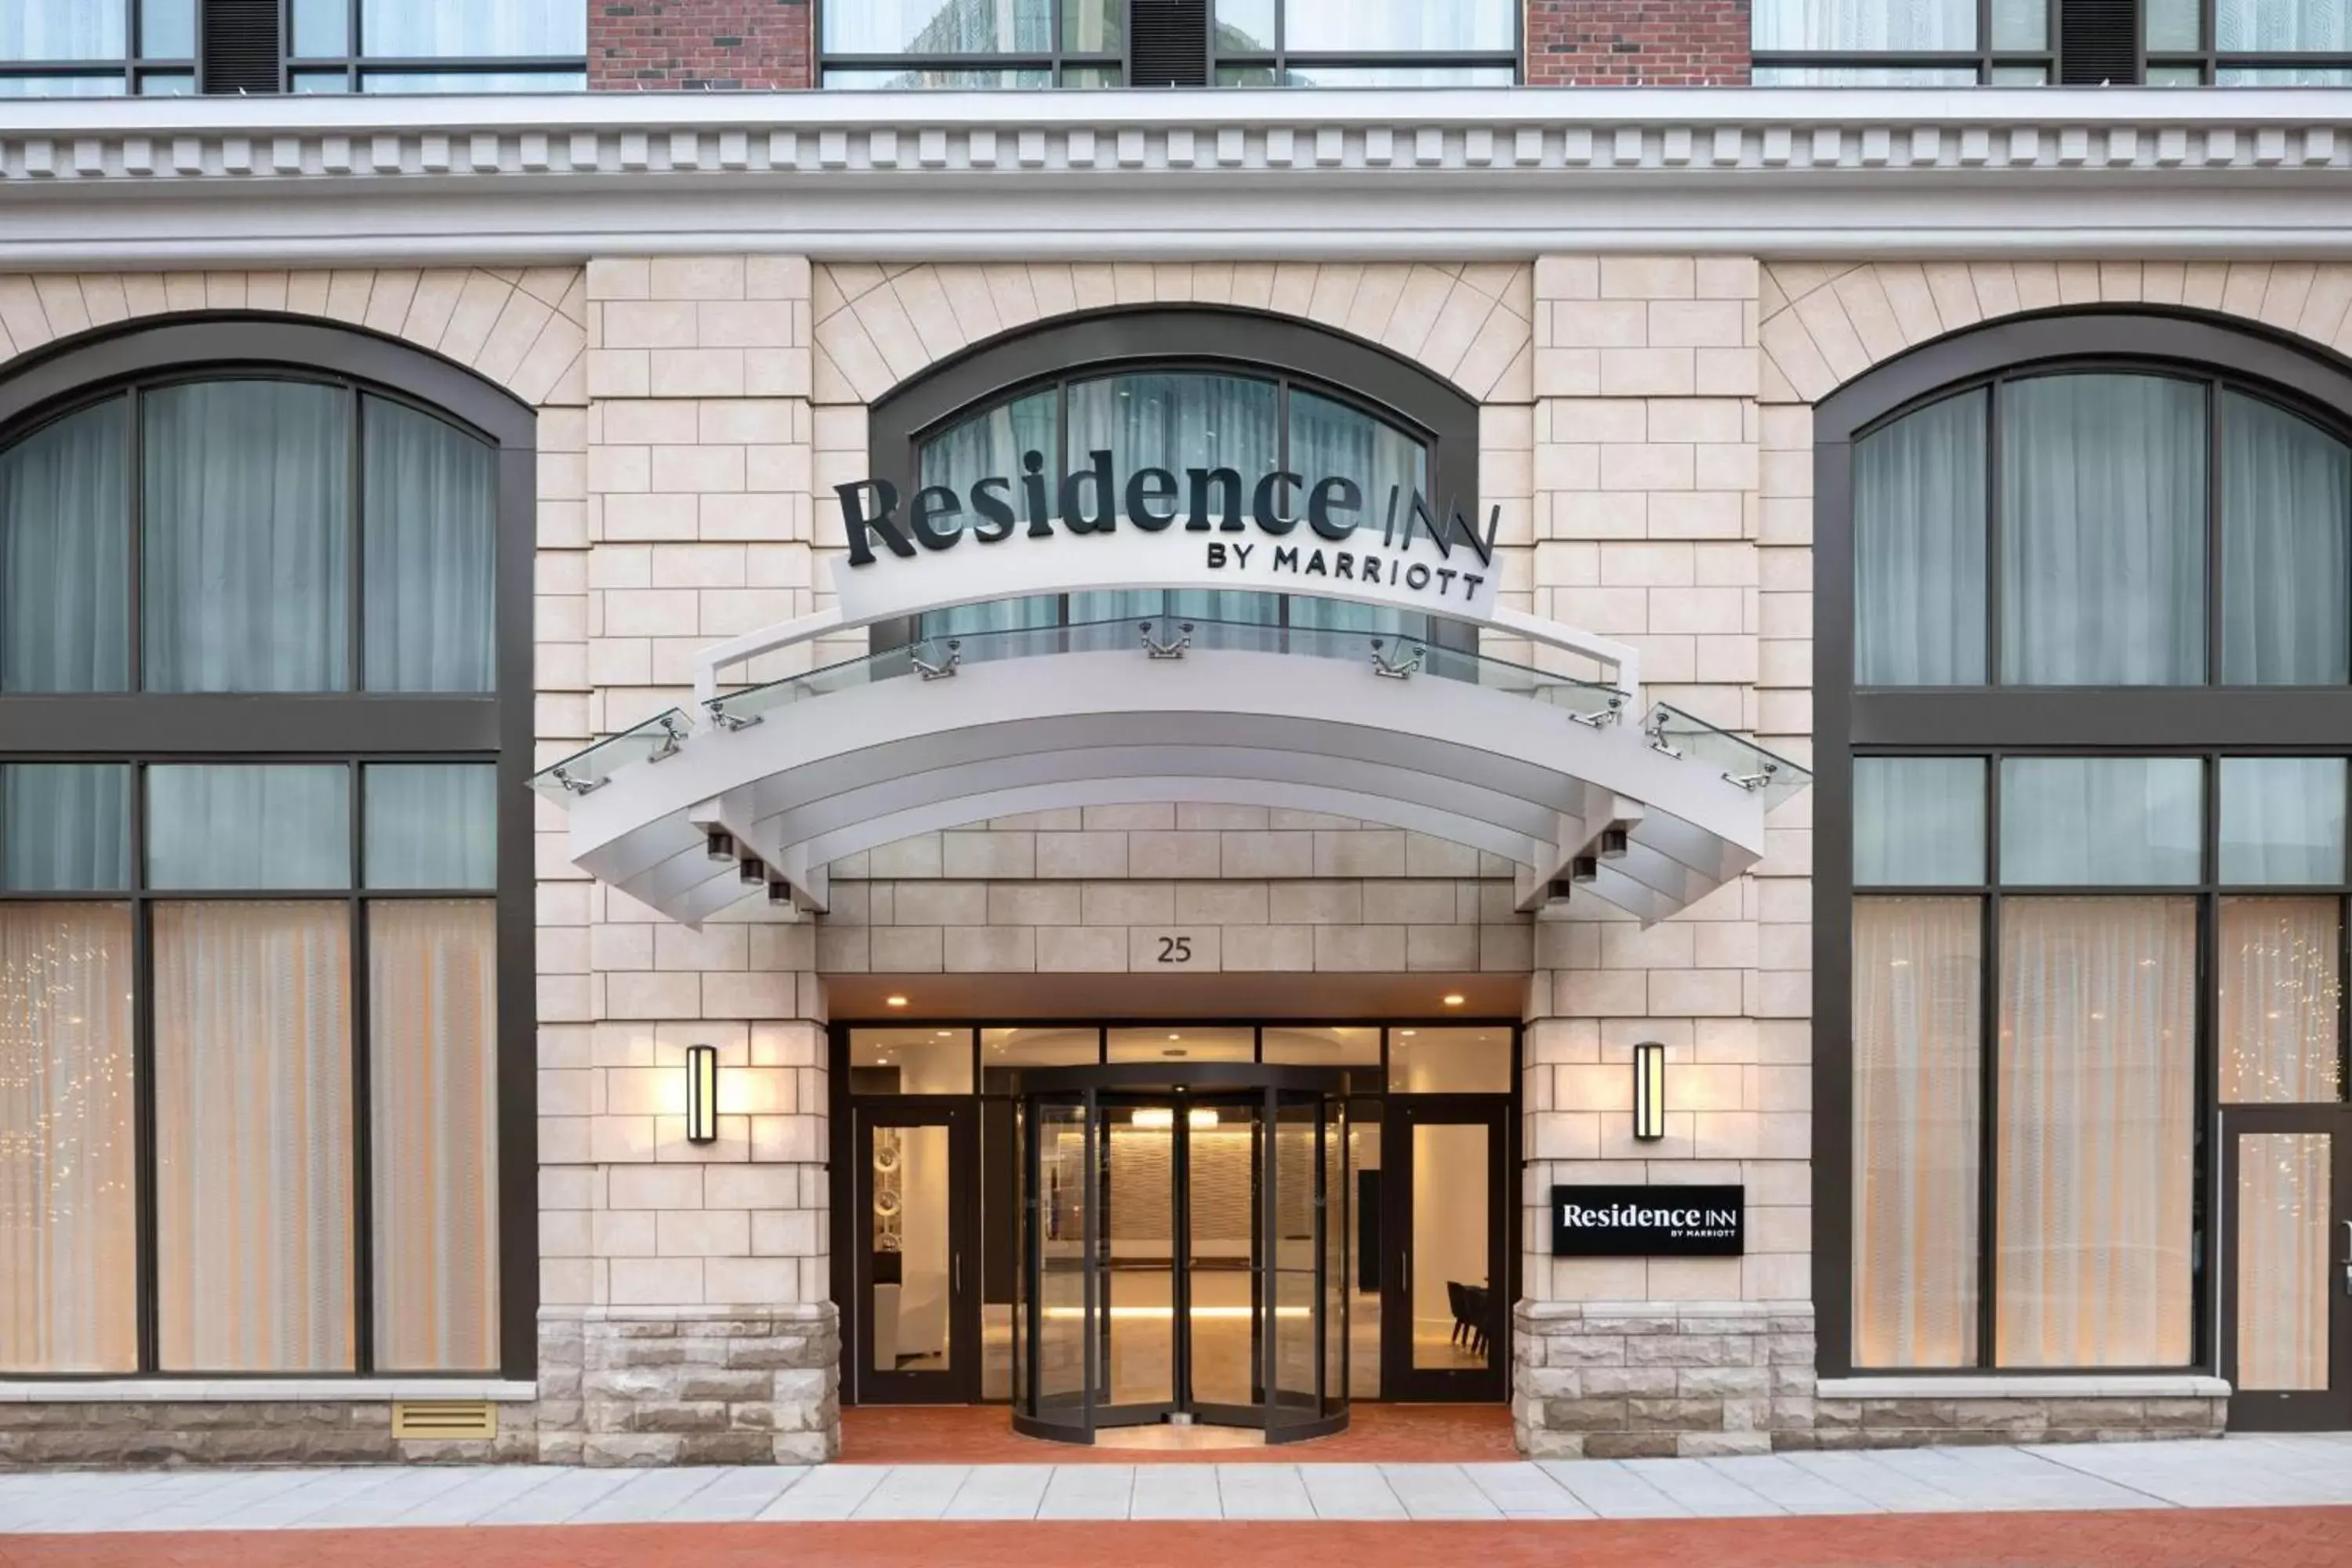 Property building in Residence Inn by Marriott Stamford Downtown